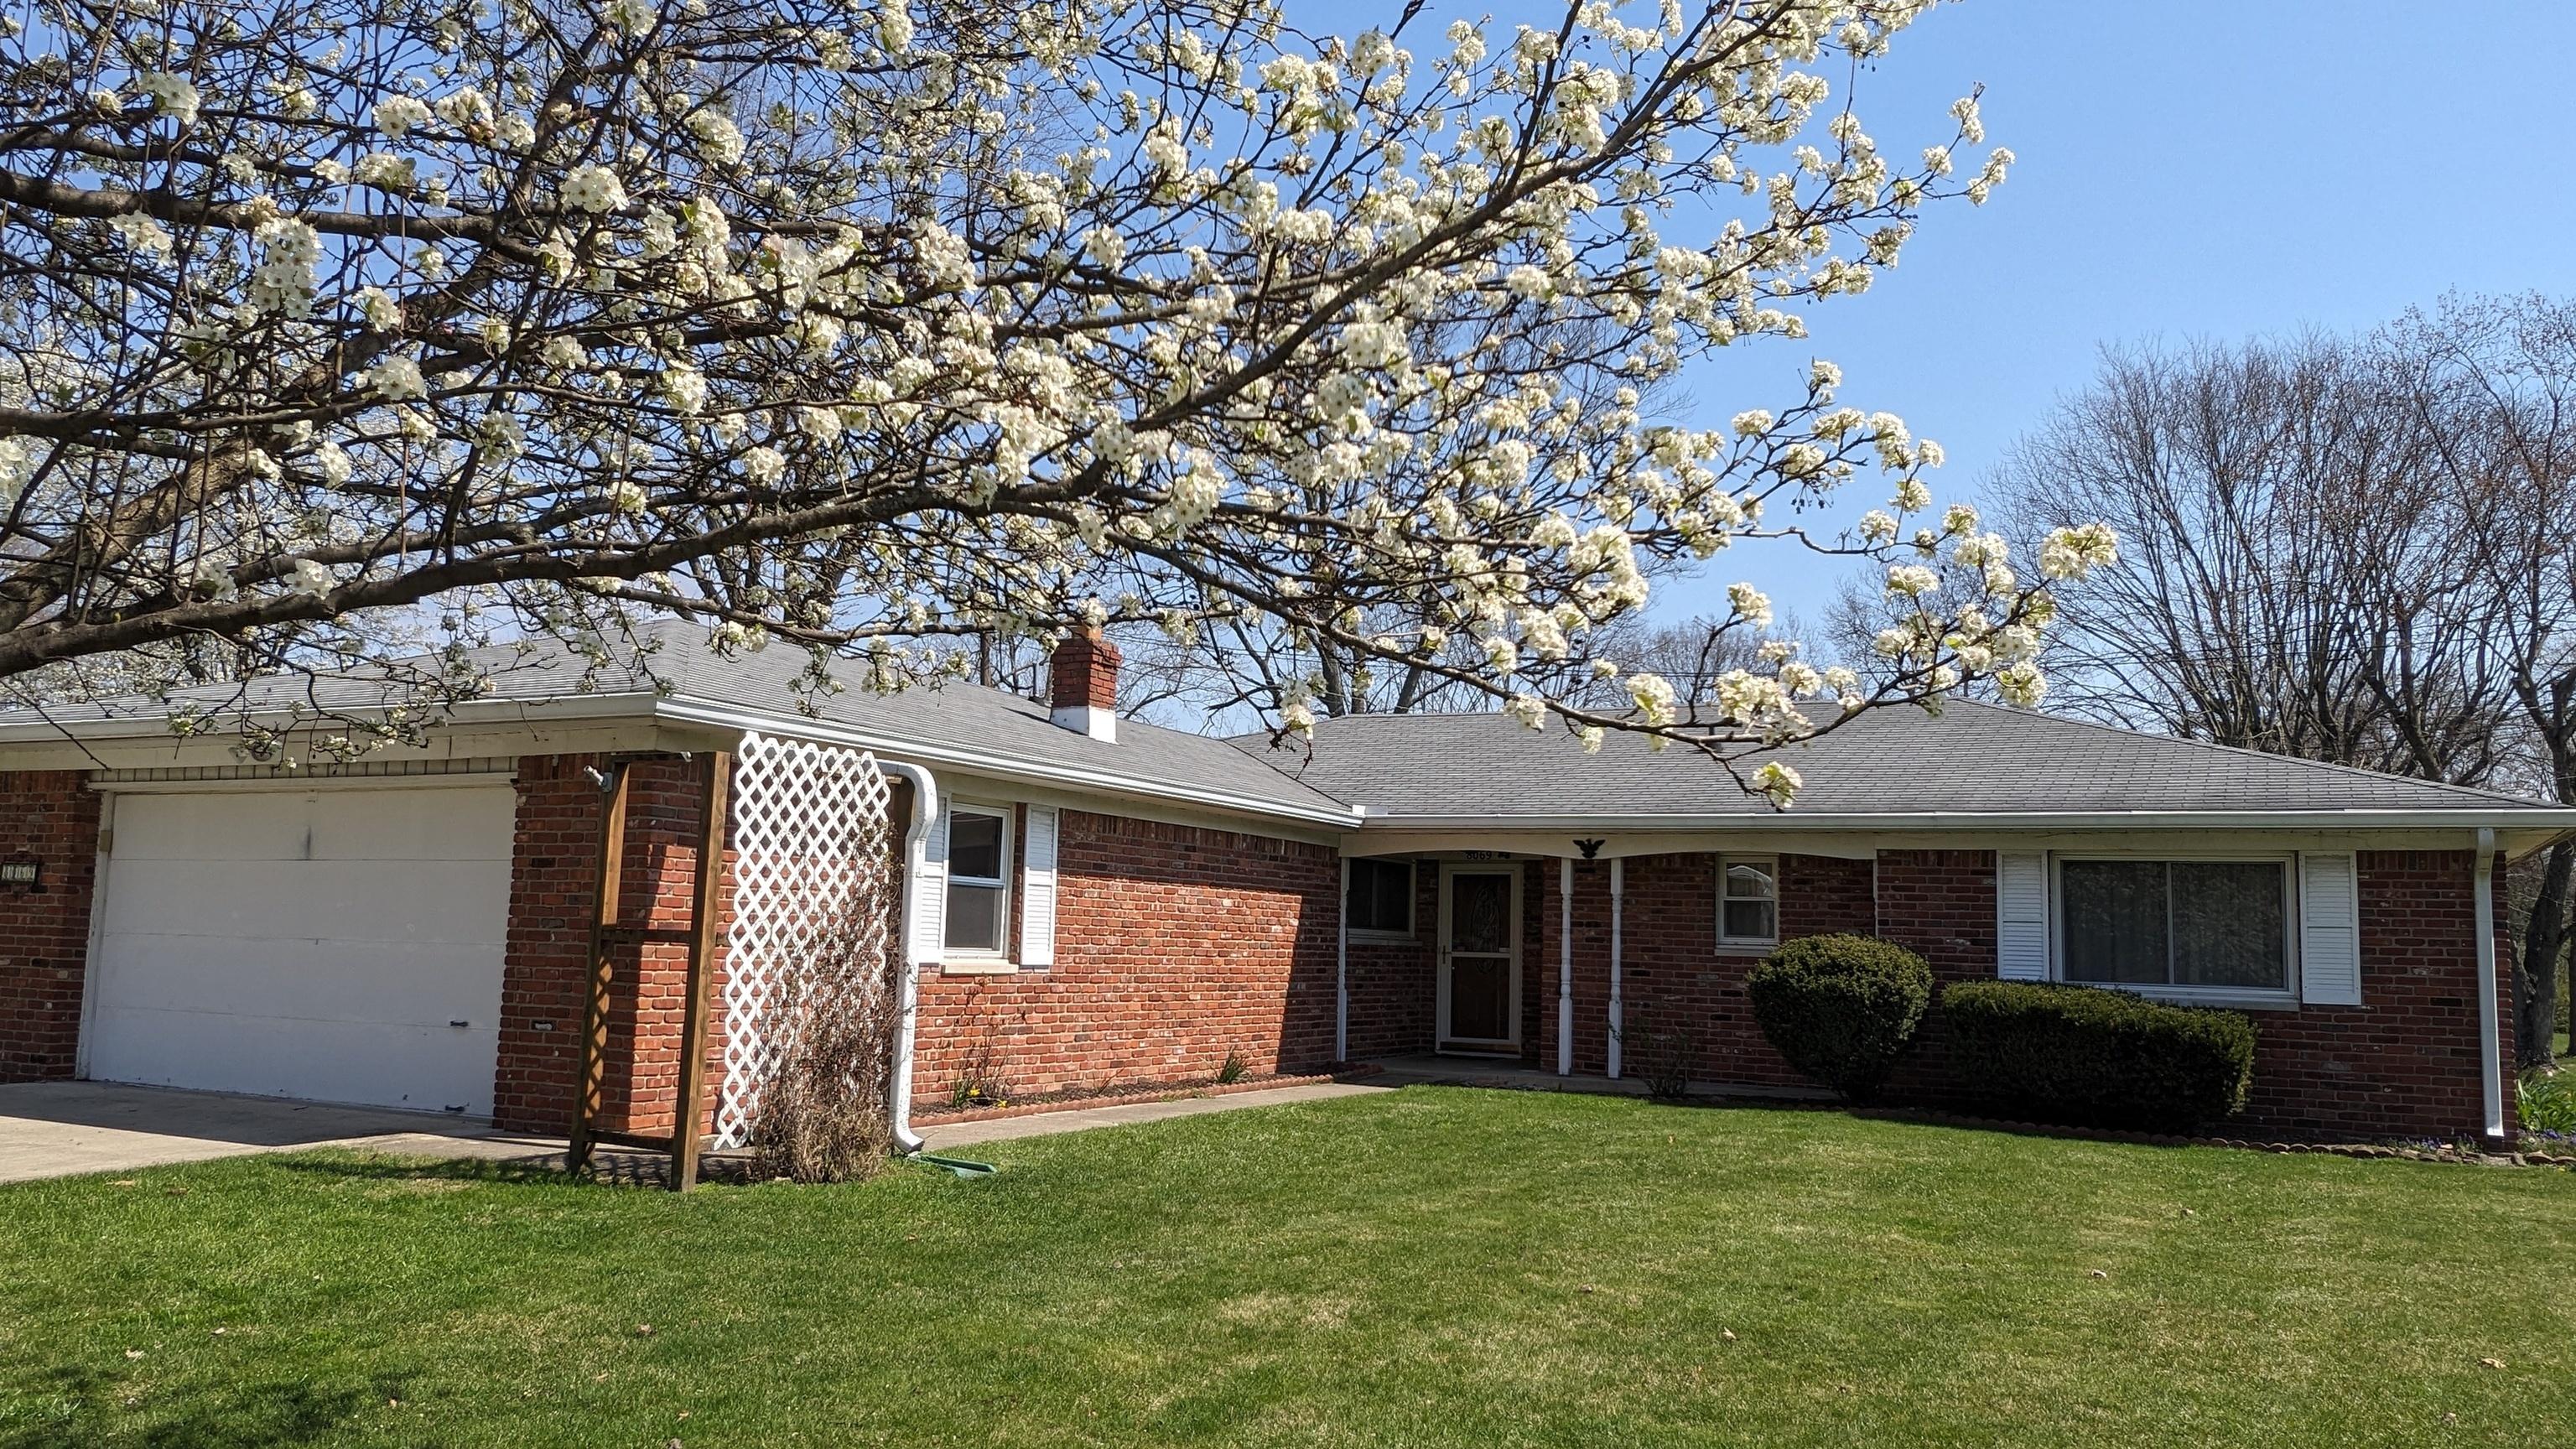 Photo one of 8069 Stafford Ln Indianapolis IN 46260 | MLS 21963096